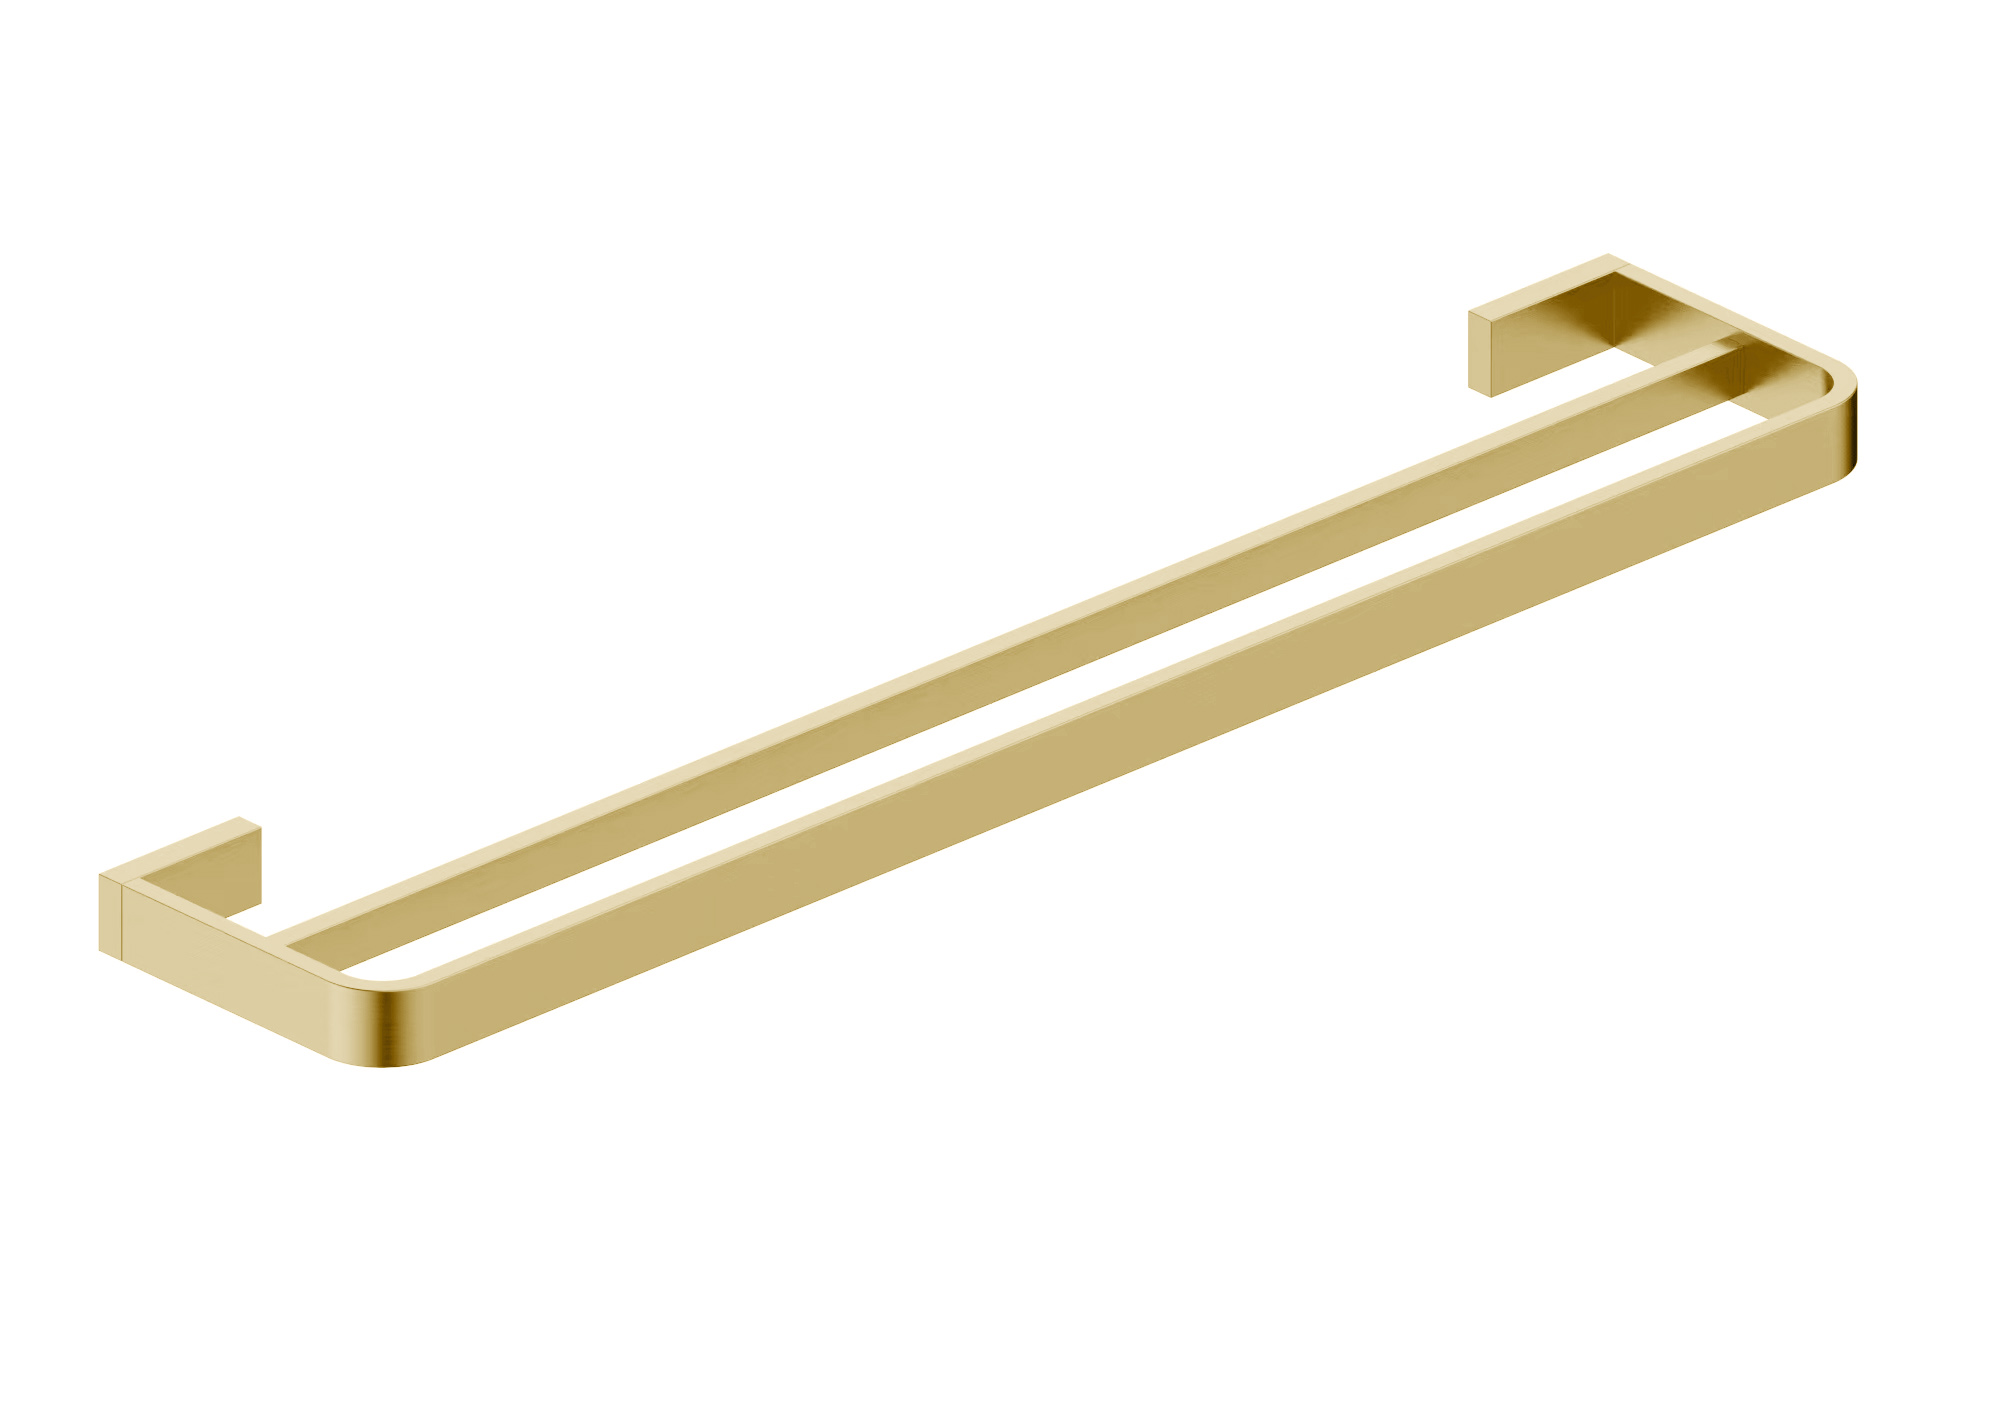 Eliseo Ricci Exclusiv Brushed Brass Double Towel Rail (19543)